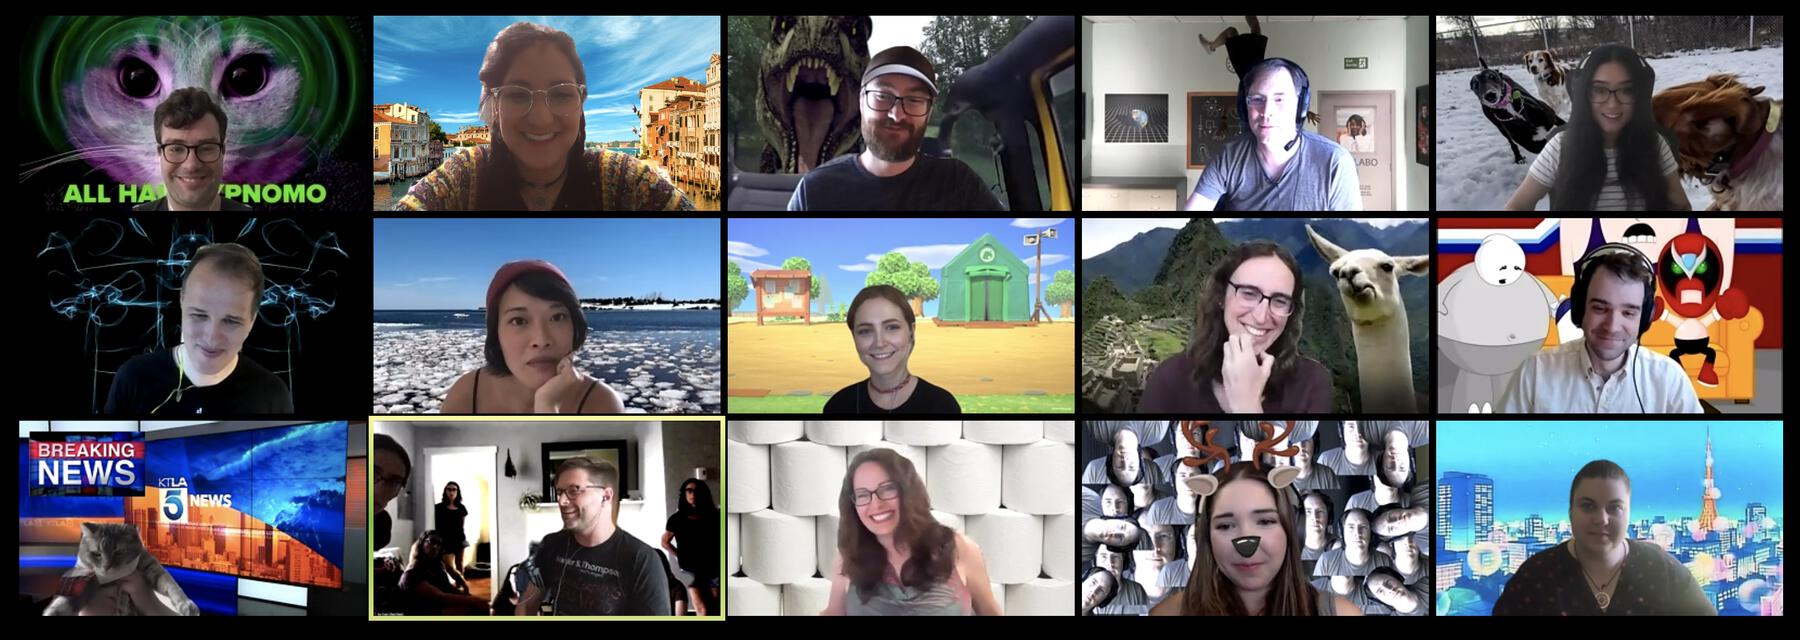 Screenshot of zoom backgrounds and people smiling.